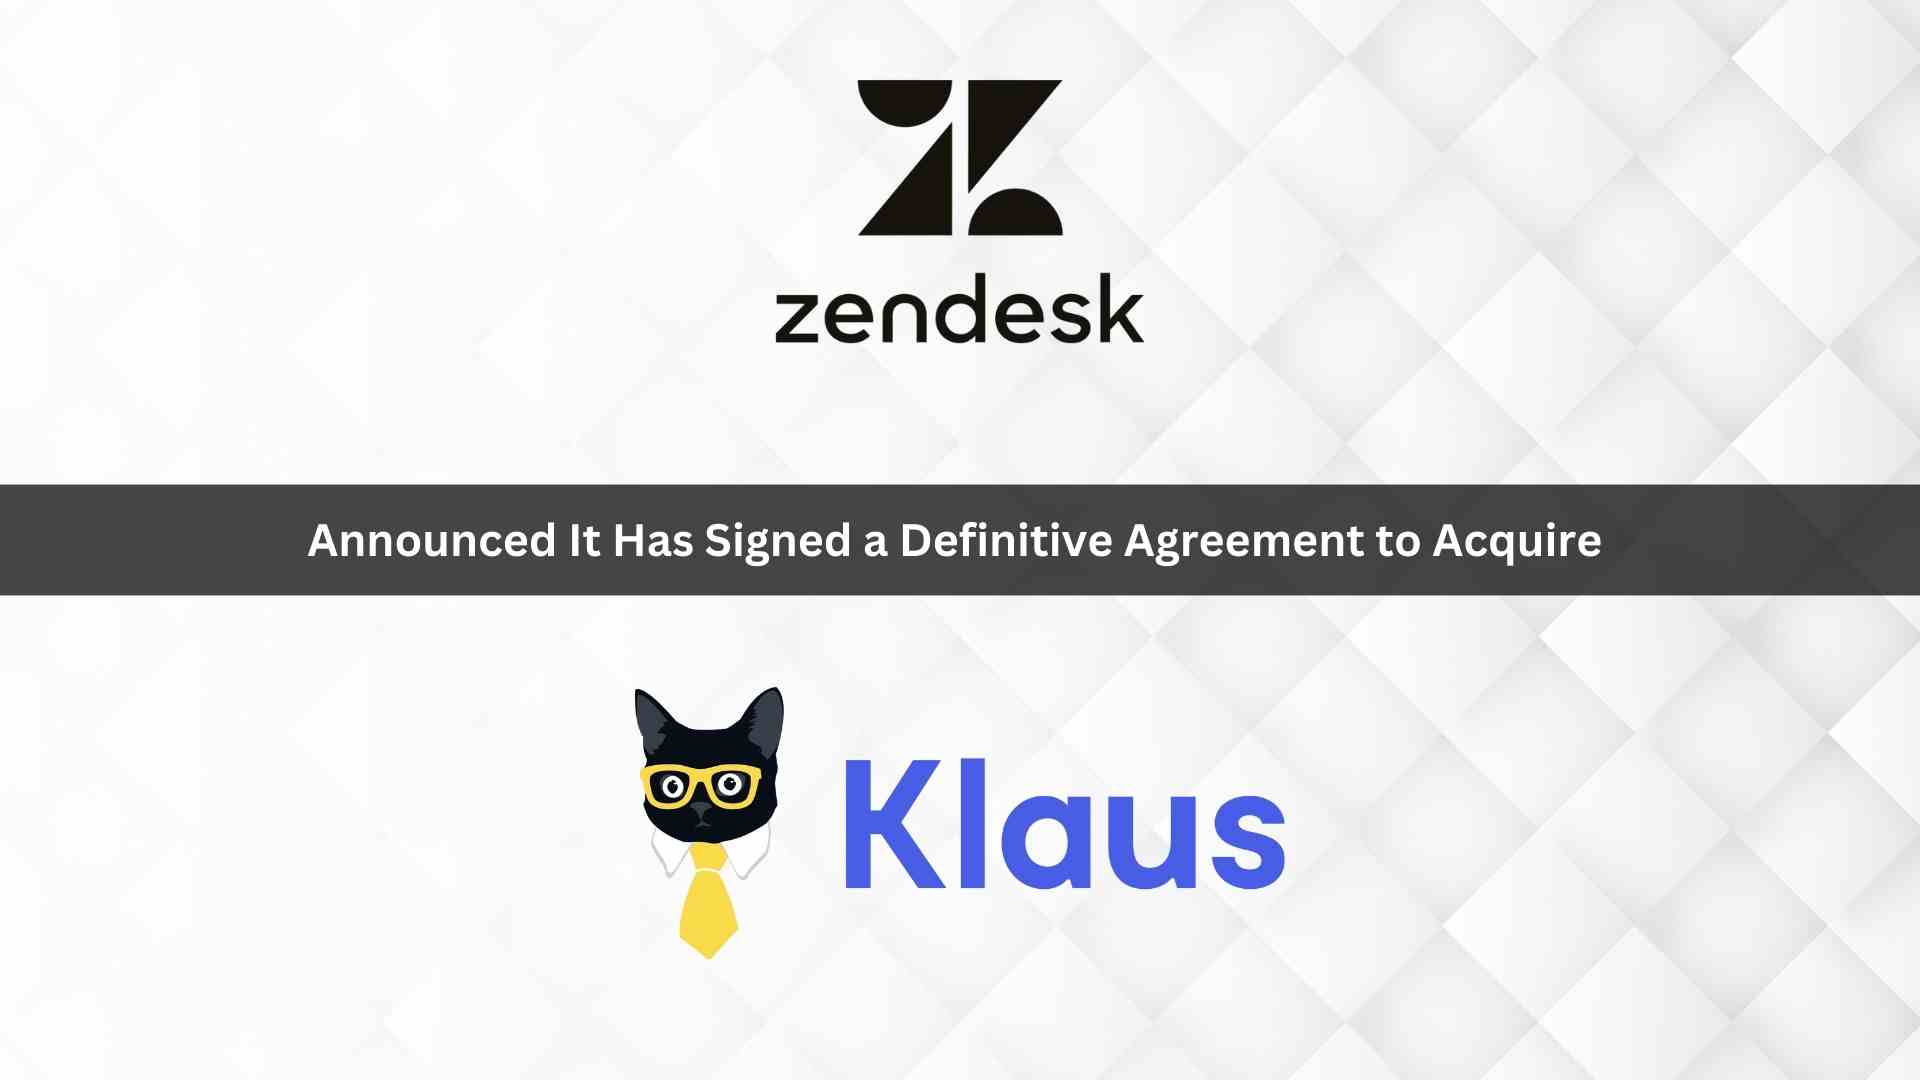 Zendesk signs definitive agreement to acquire Klaus